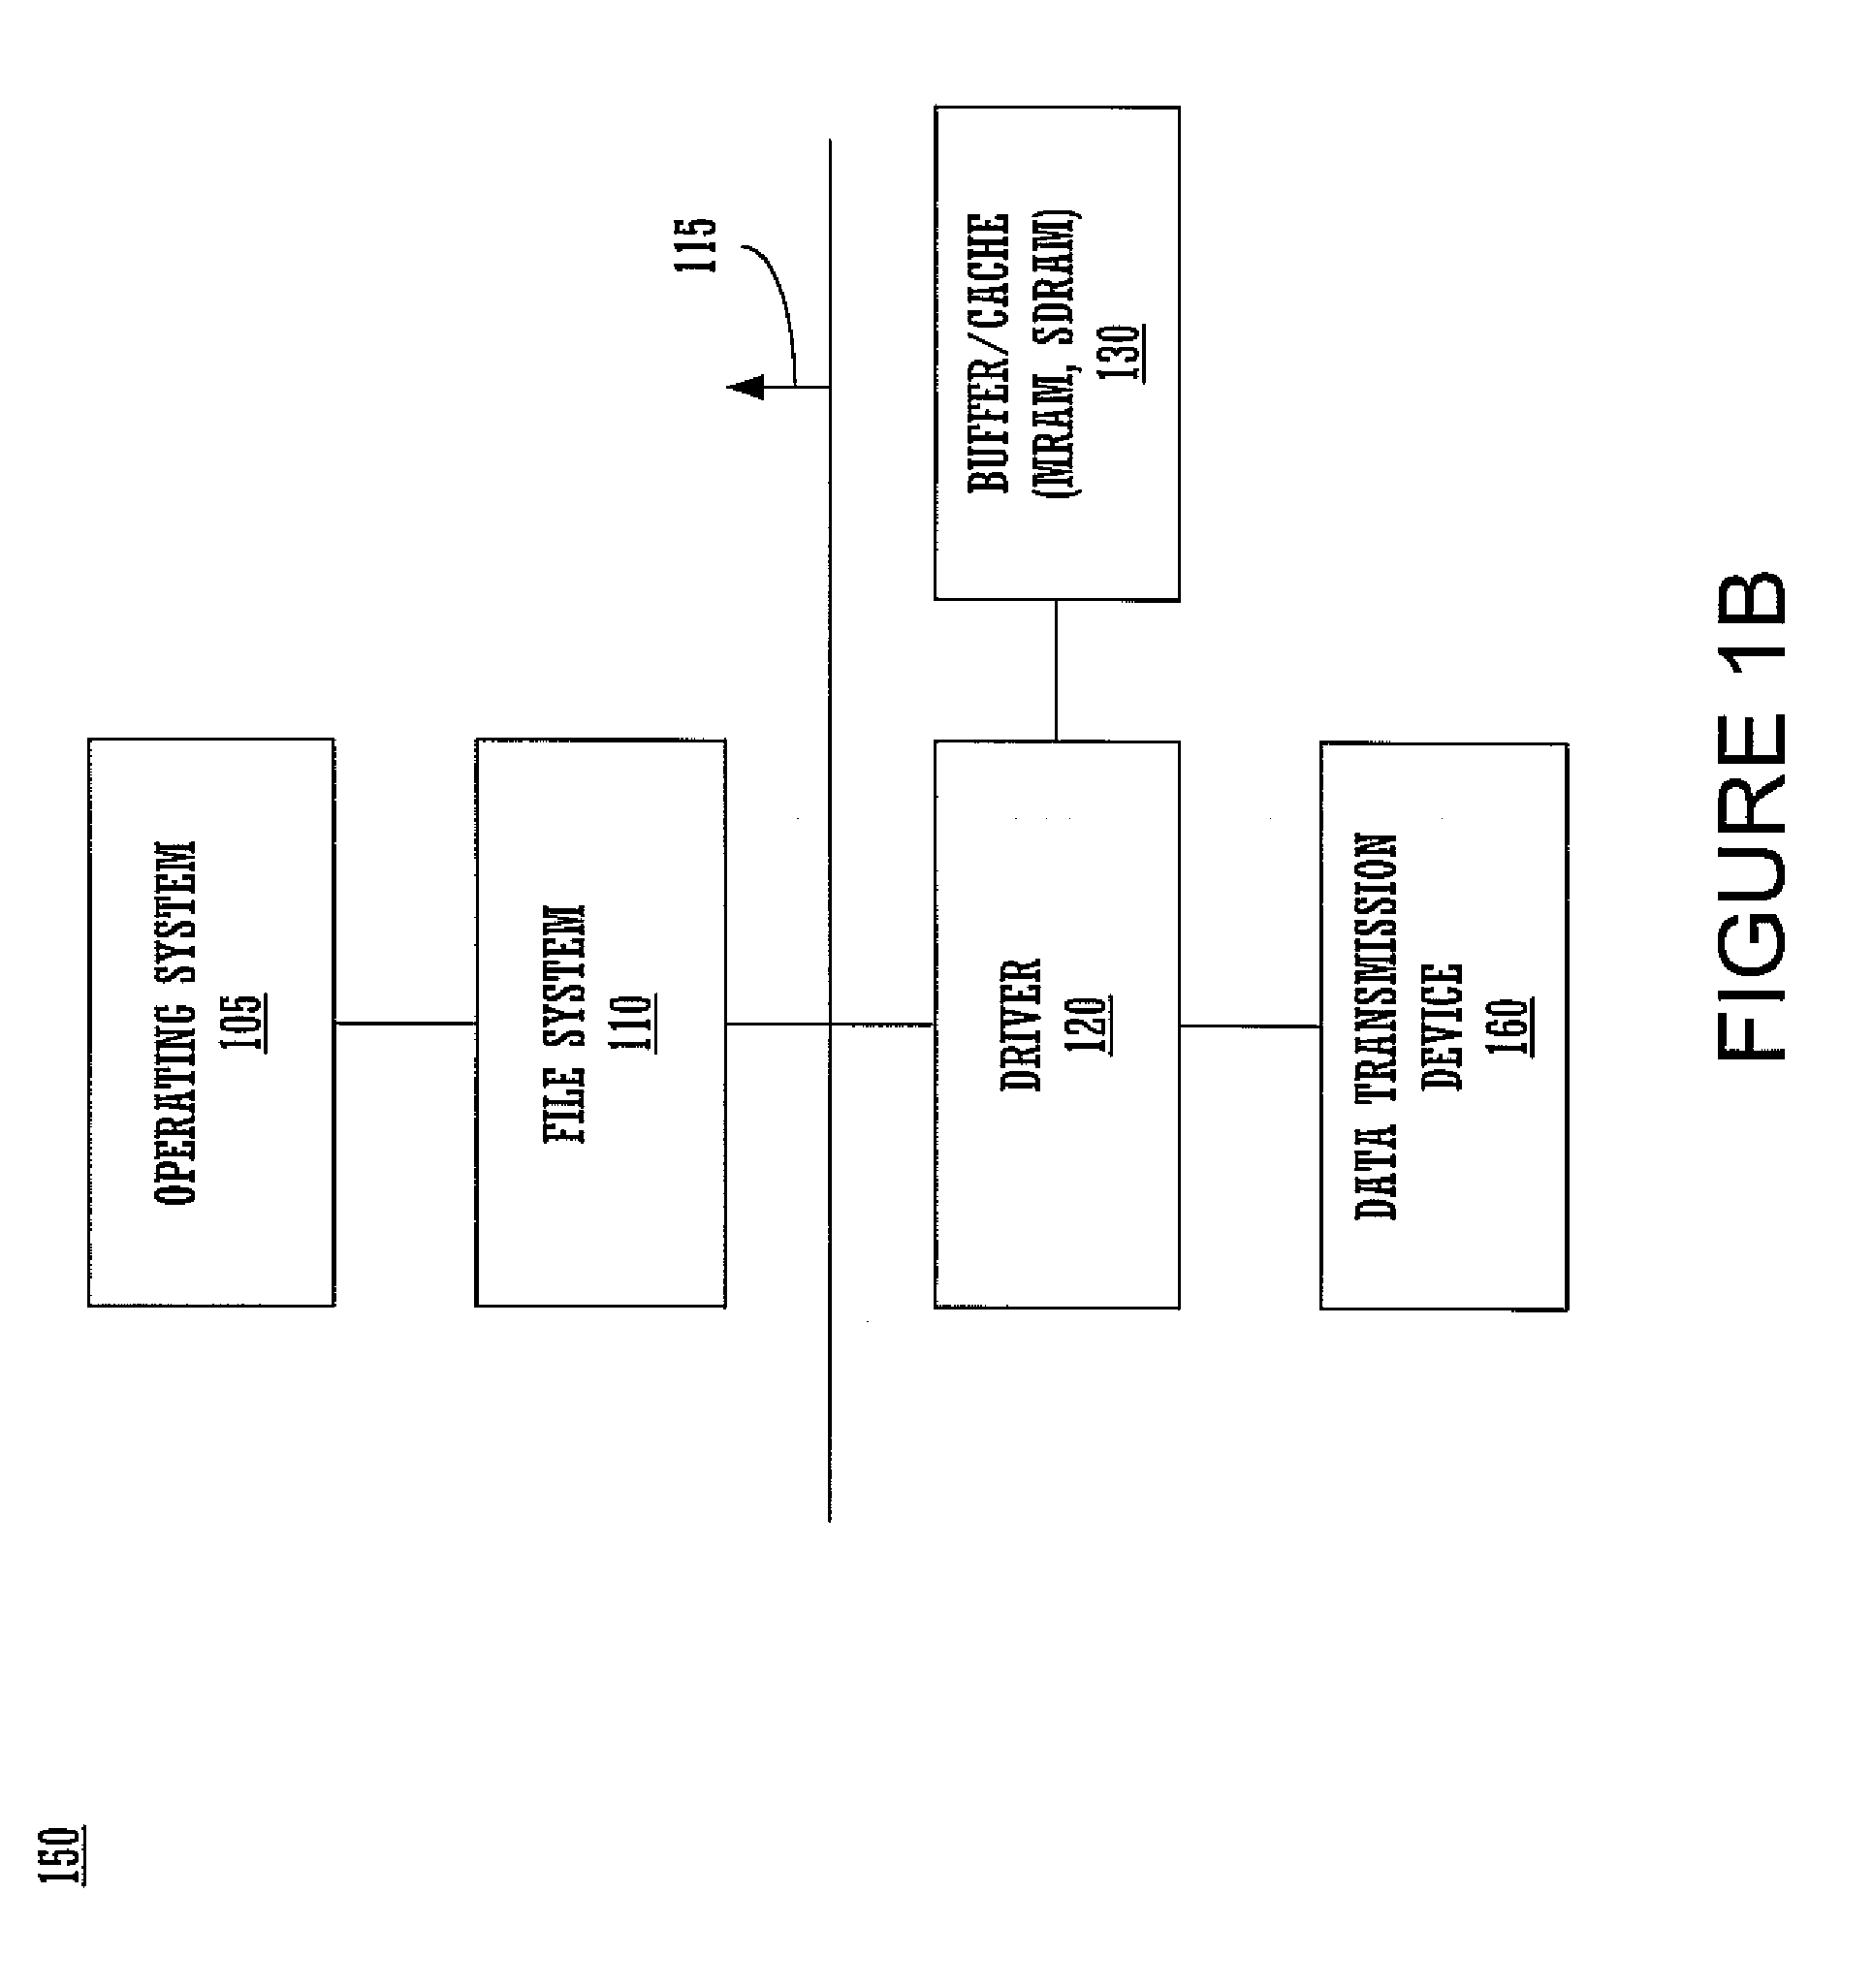 System and method for improving data integrity and memory performance using non-volatile media